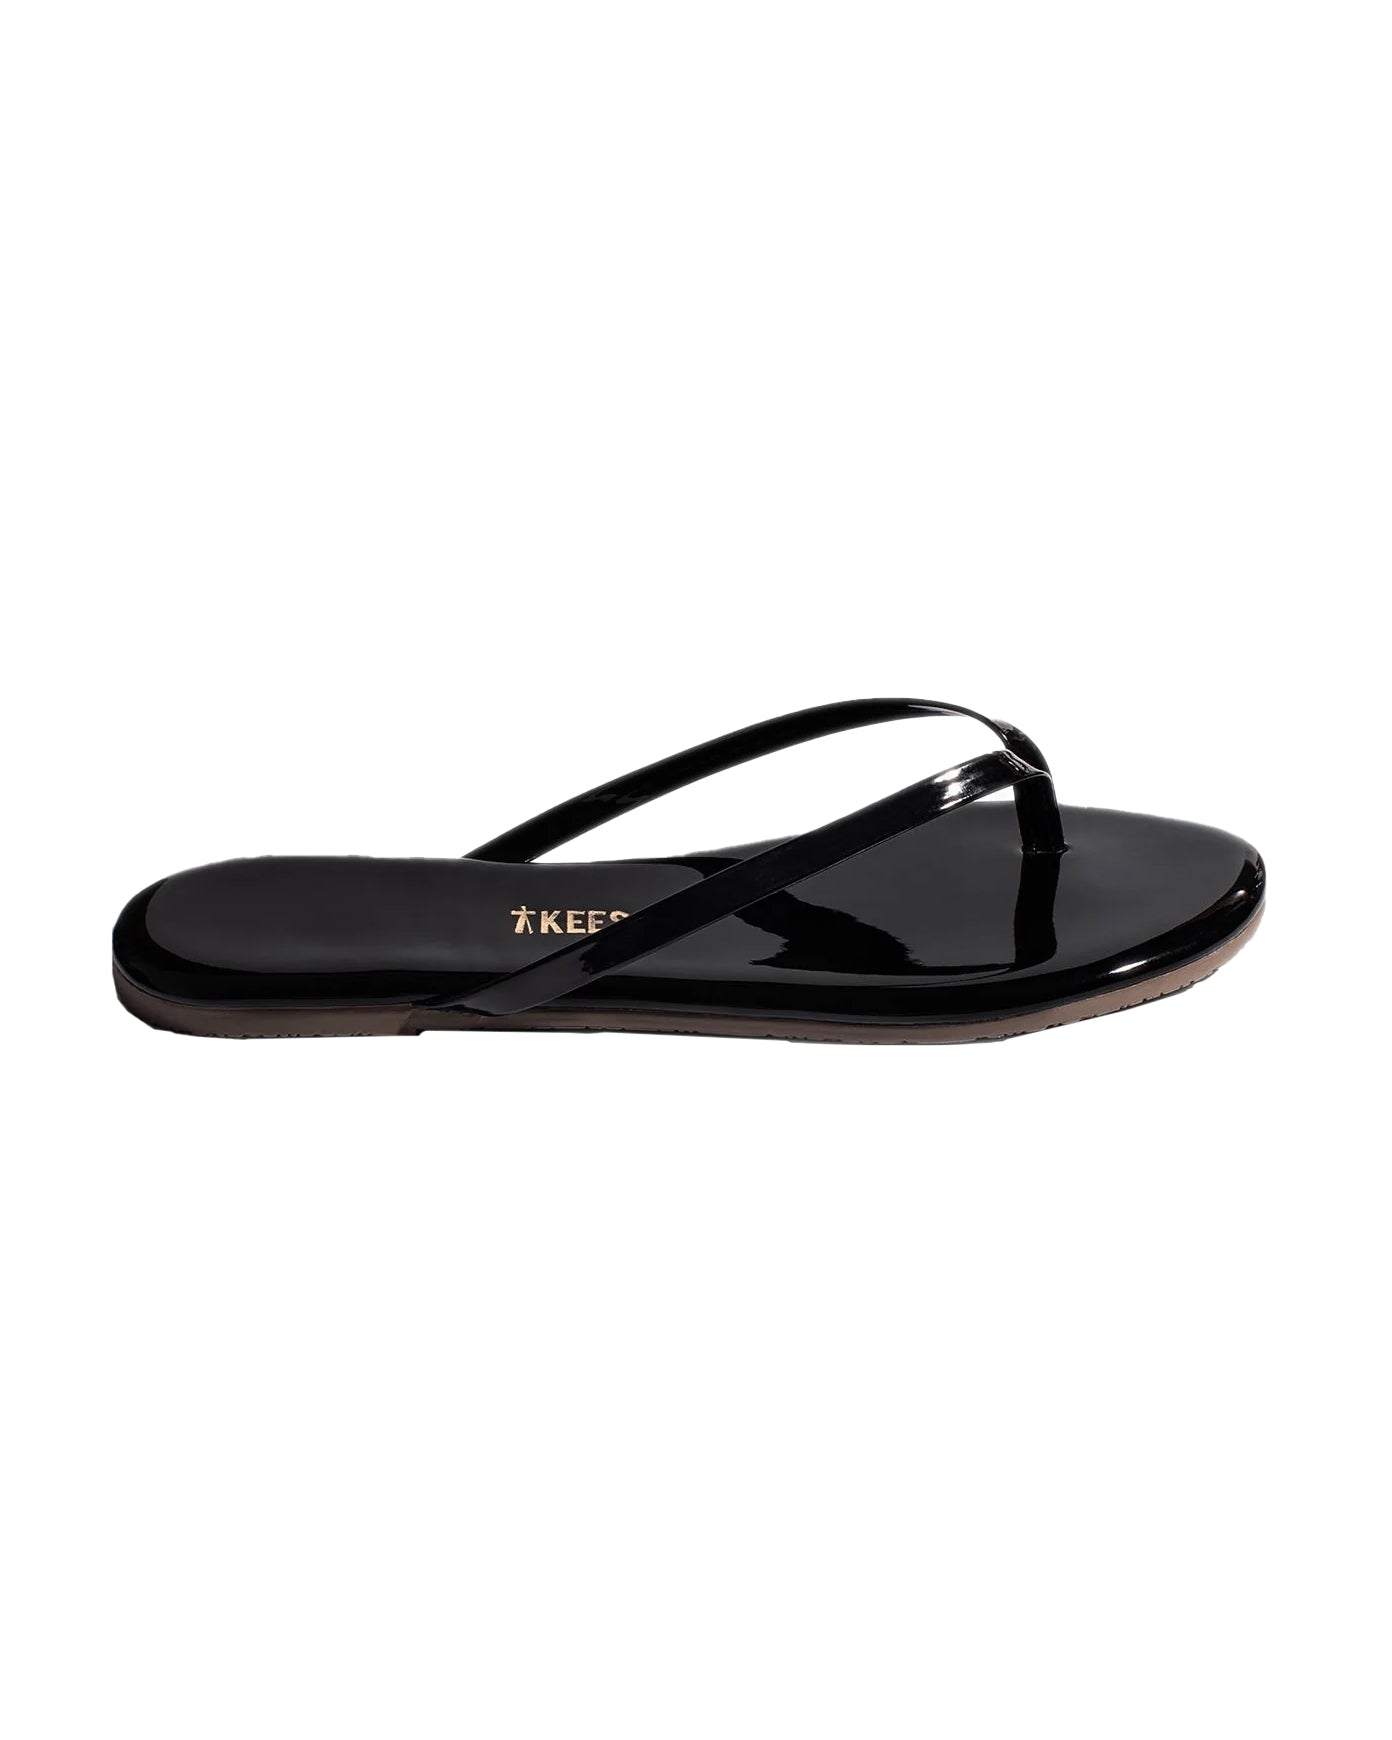 Lily Sandals (Black Gloss)